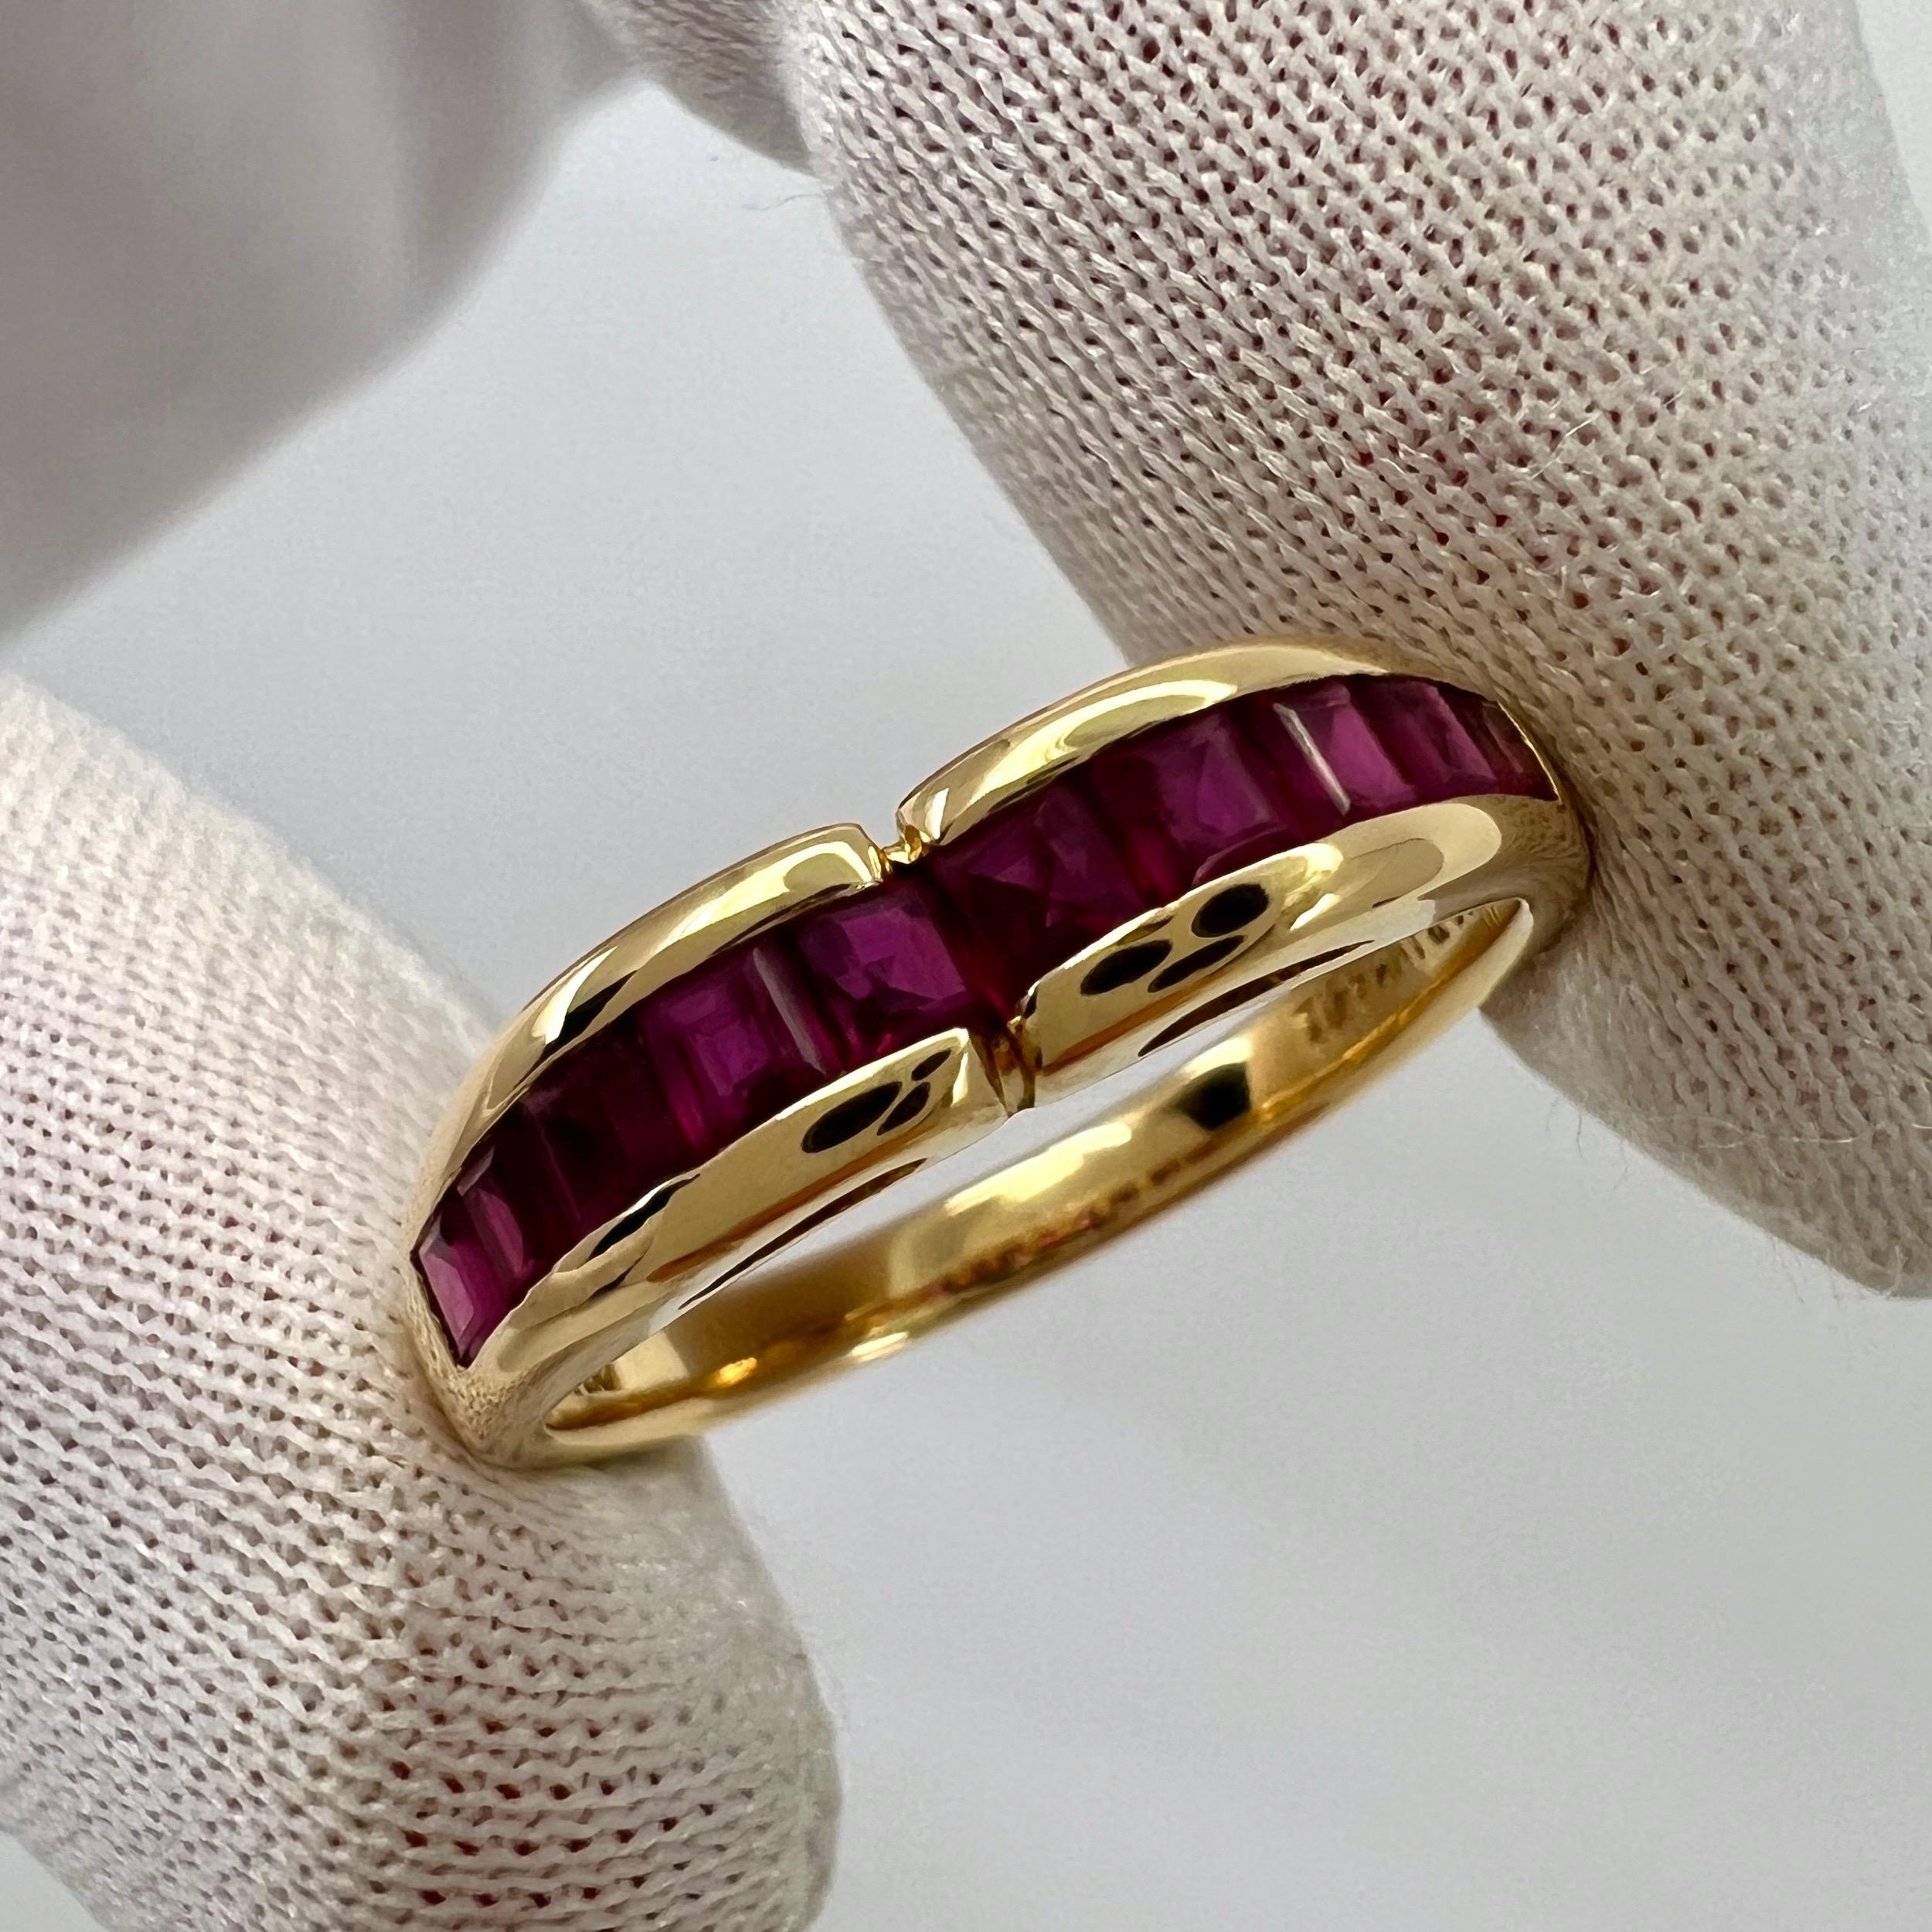 Tiffany & Co. Red Ruby Square Princess Cut 18k Yellow Gold Eternity Band Ring 7